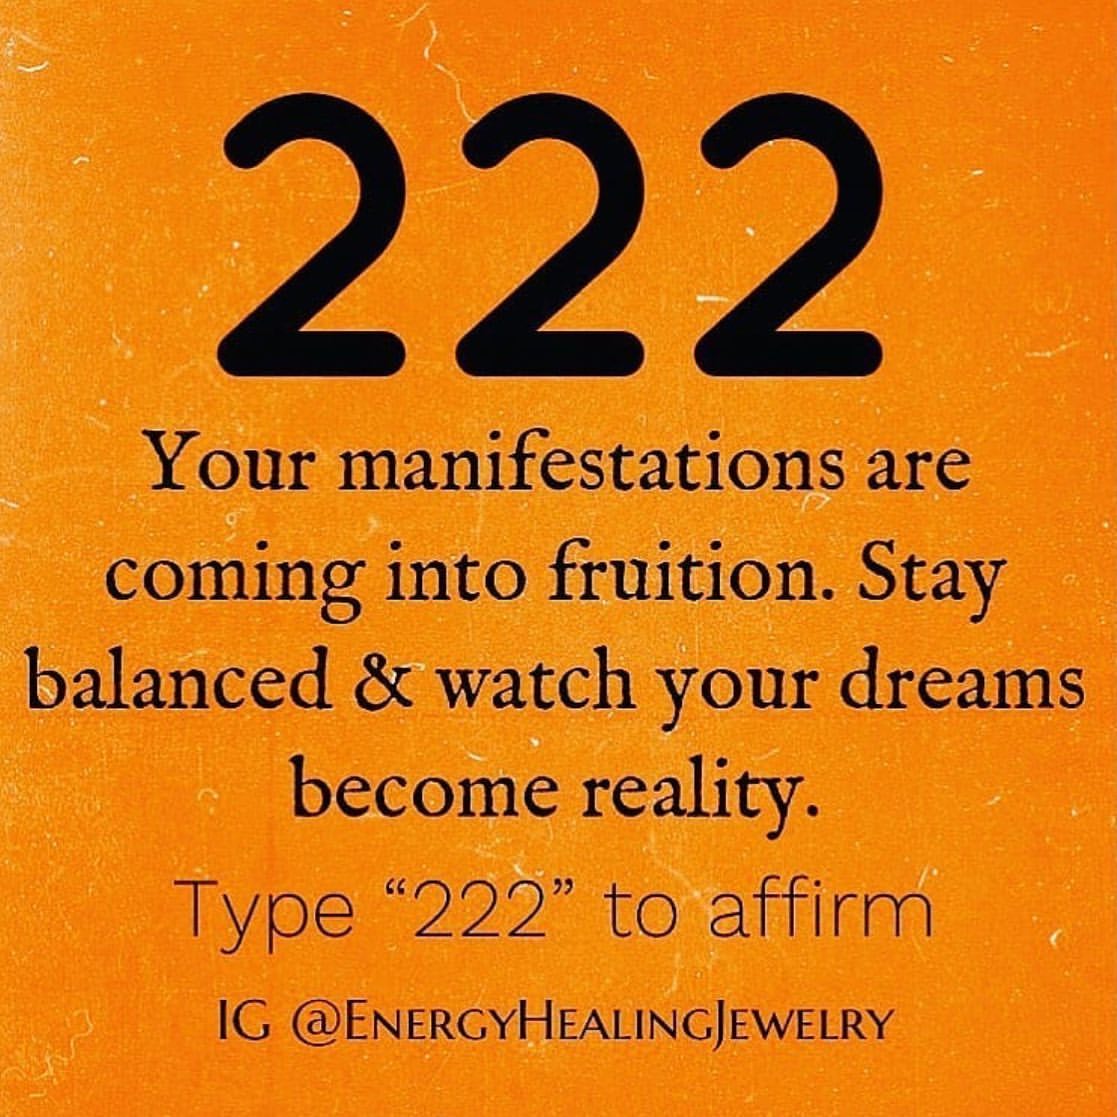 Your manifestations are coming into fruition. Stay balanced & watch your dreams become reality.